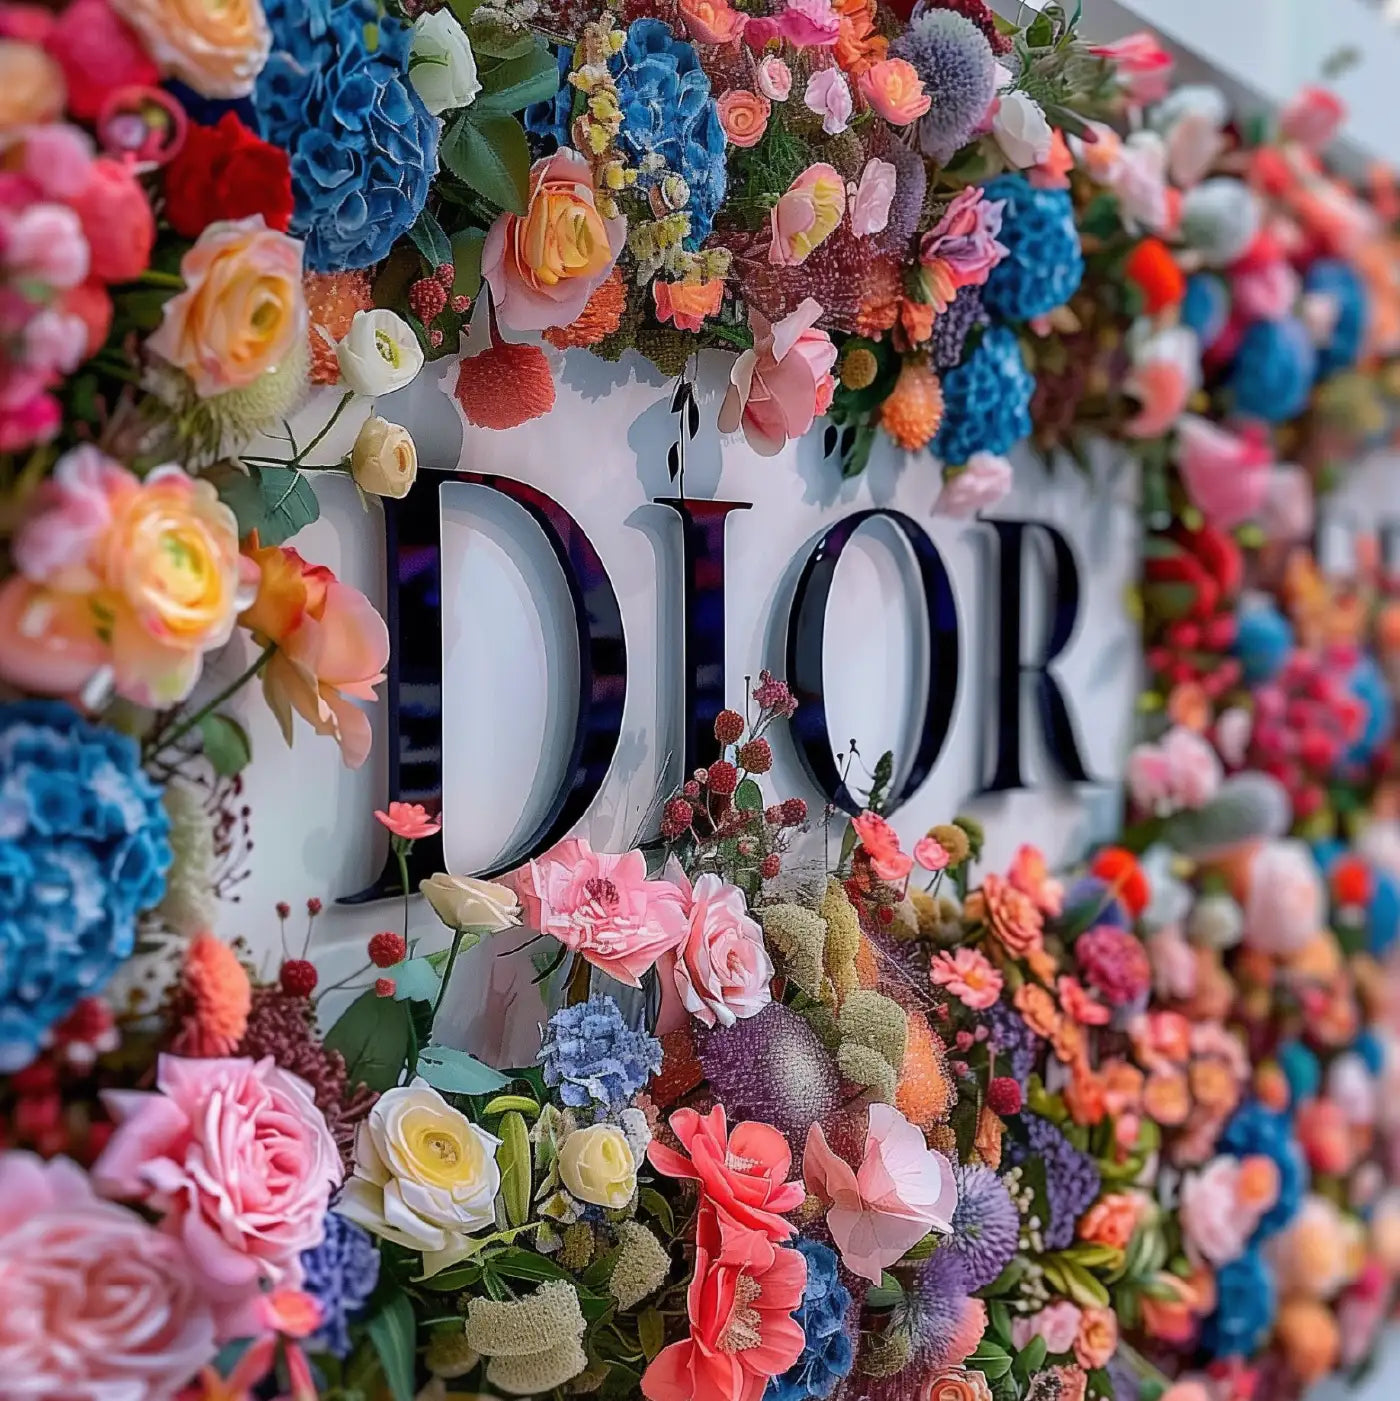 Luxurious flower installation featuring a variety of colourful blooms surrounding a 'DIOR' sign, showcasing intricate floral artistry. Fabulous Flowers and Gifts.